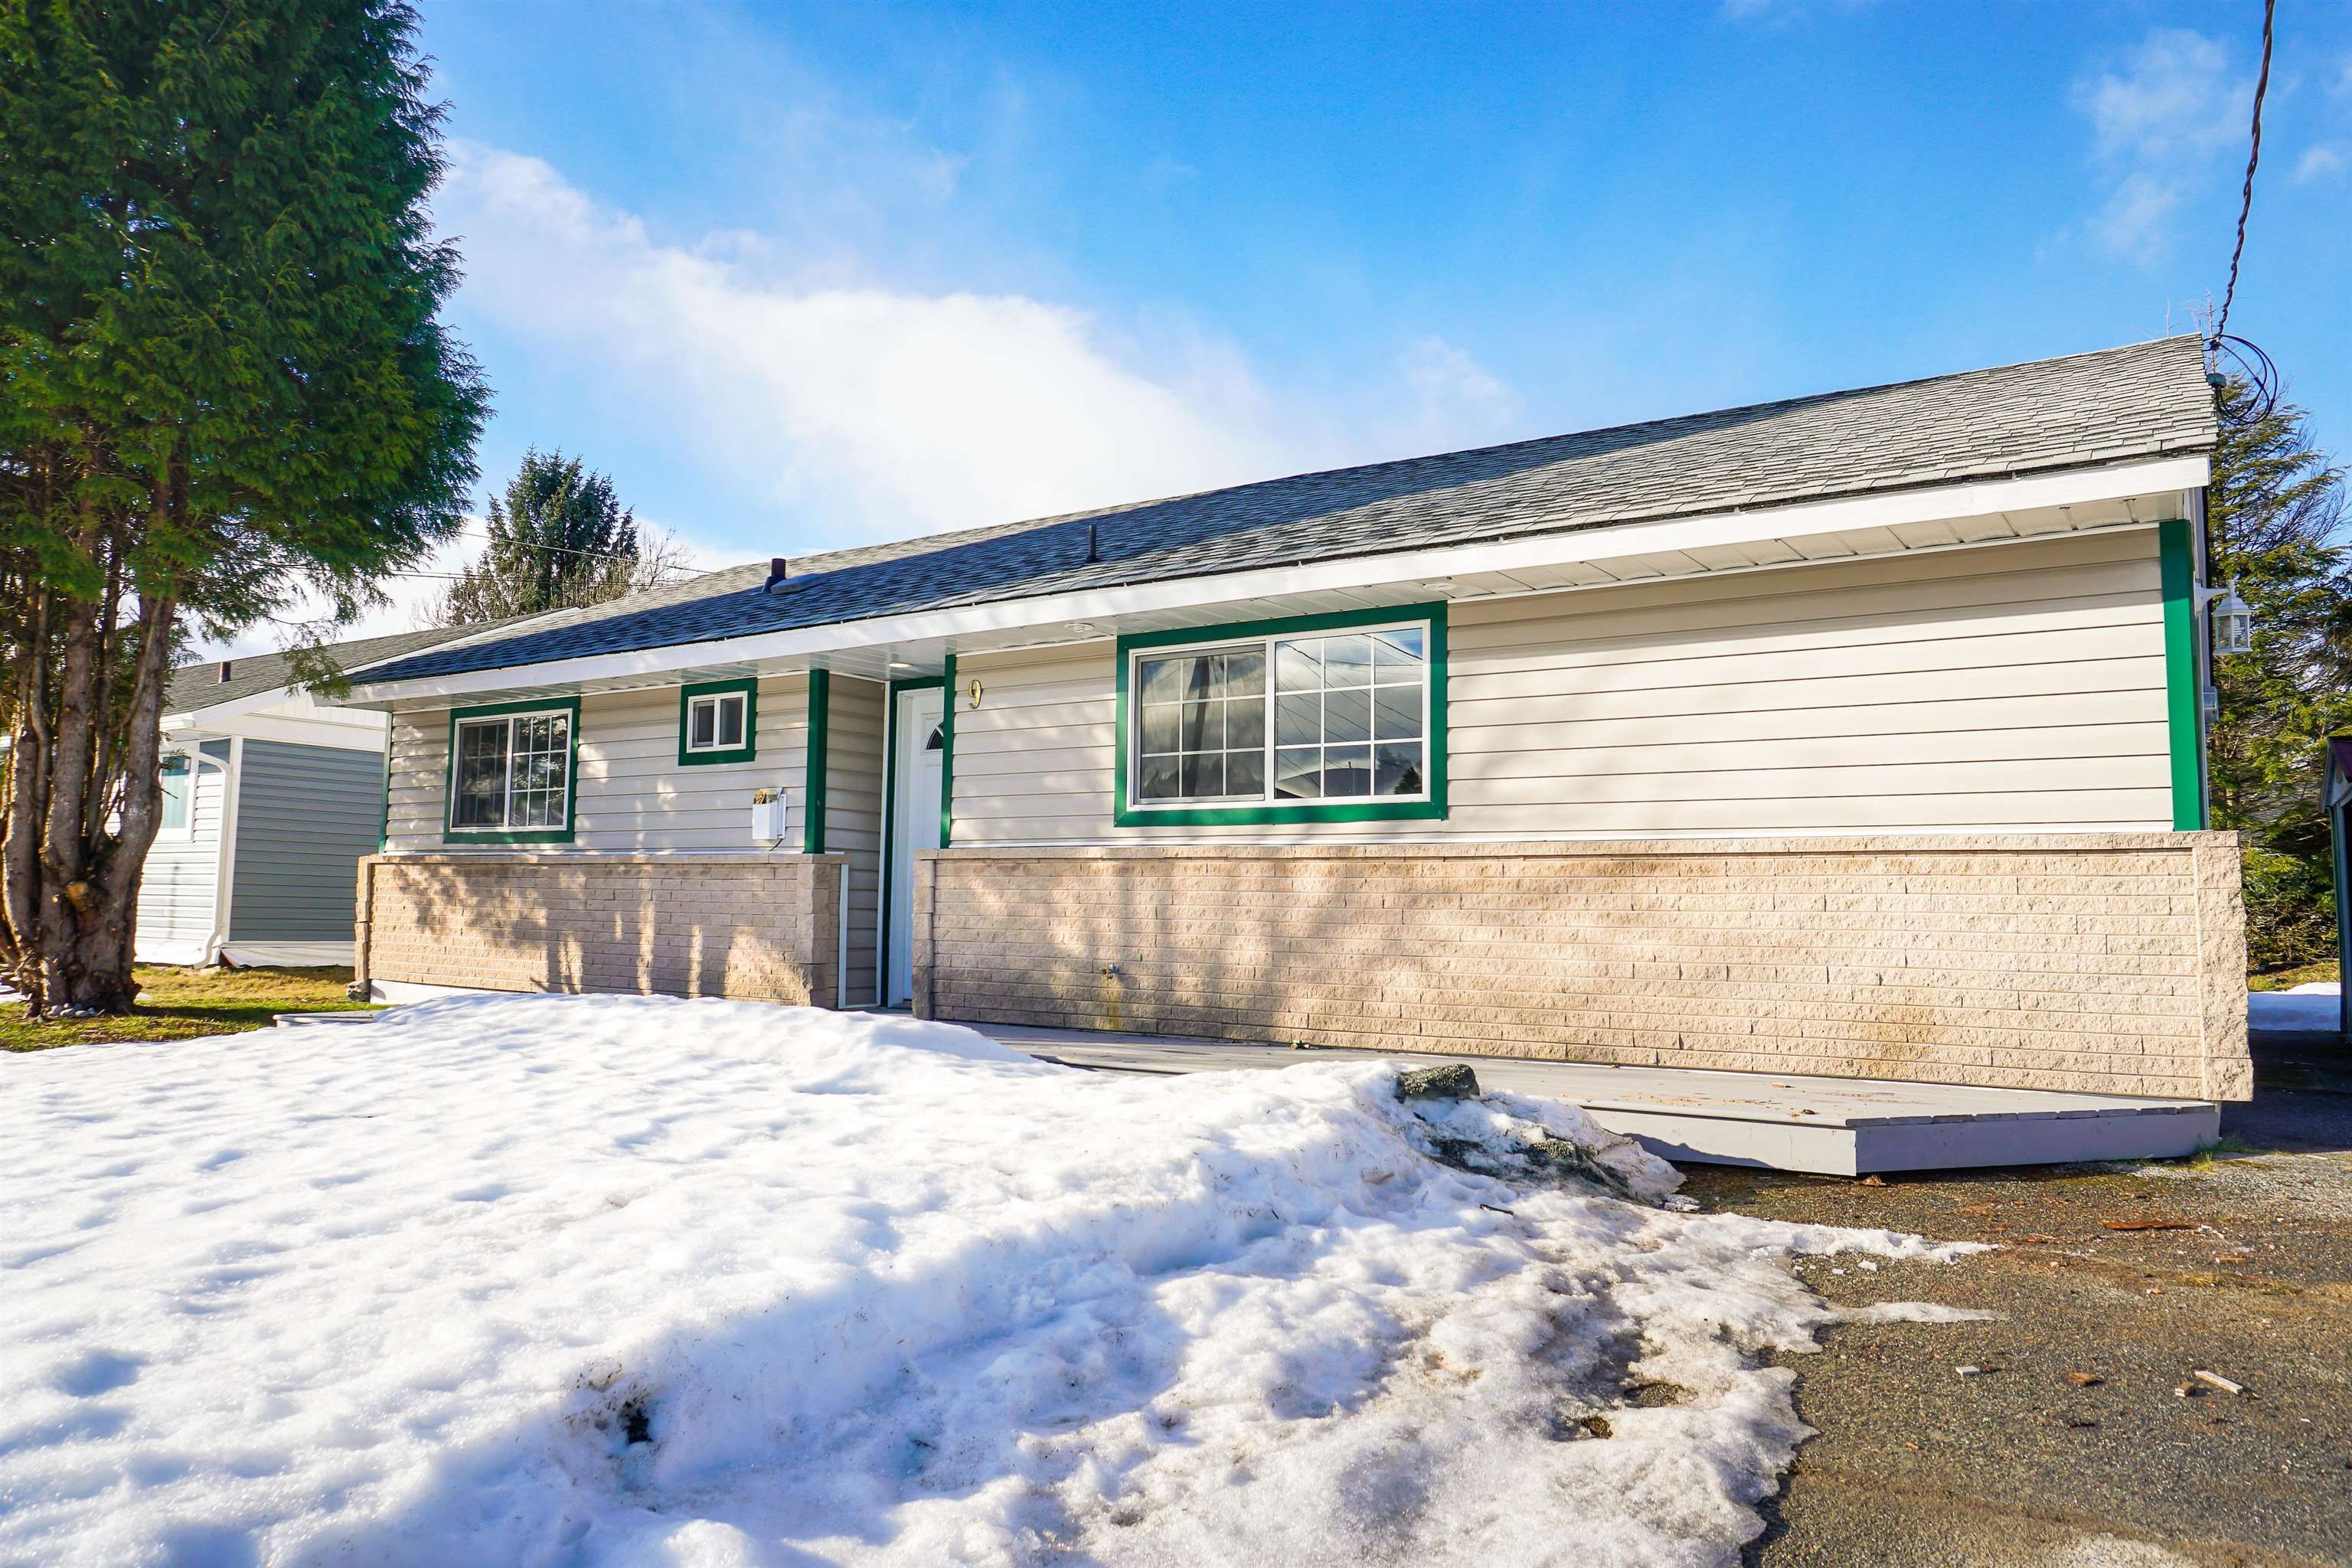 I have sold a property at 9 YUKON ST in Kitimat
